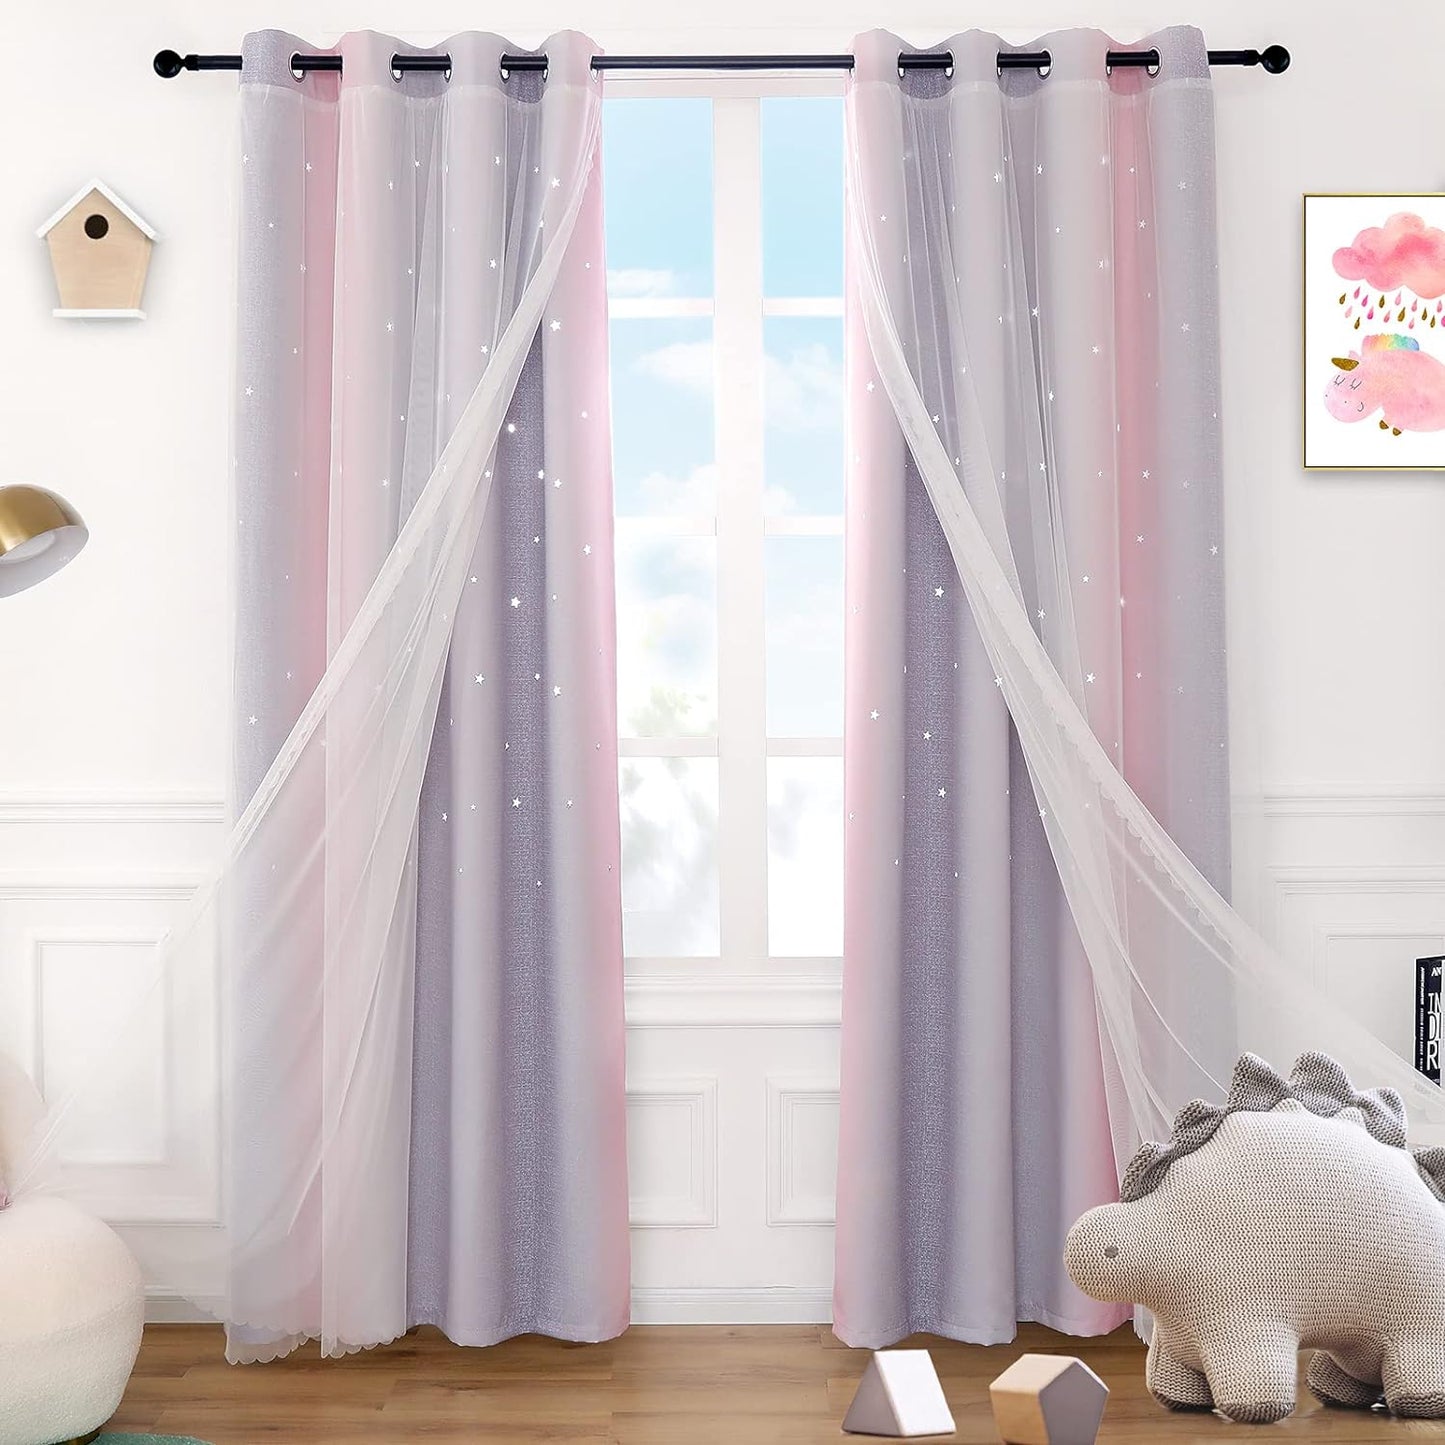 Anjee Rainbow Curtains for Girls Bedroom Double Layer Blackout Curtains Grommets Top Star Cutout Ombre Window Drapes with Sheer for Living Room 2 Panels in 52 X 84 Inch Length, Pink and Yellow  Anjee Pink/Grey/White W52" X L95" 